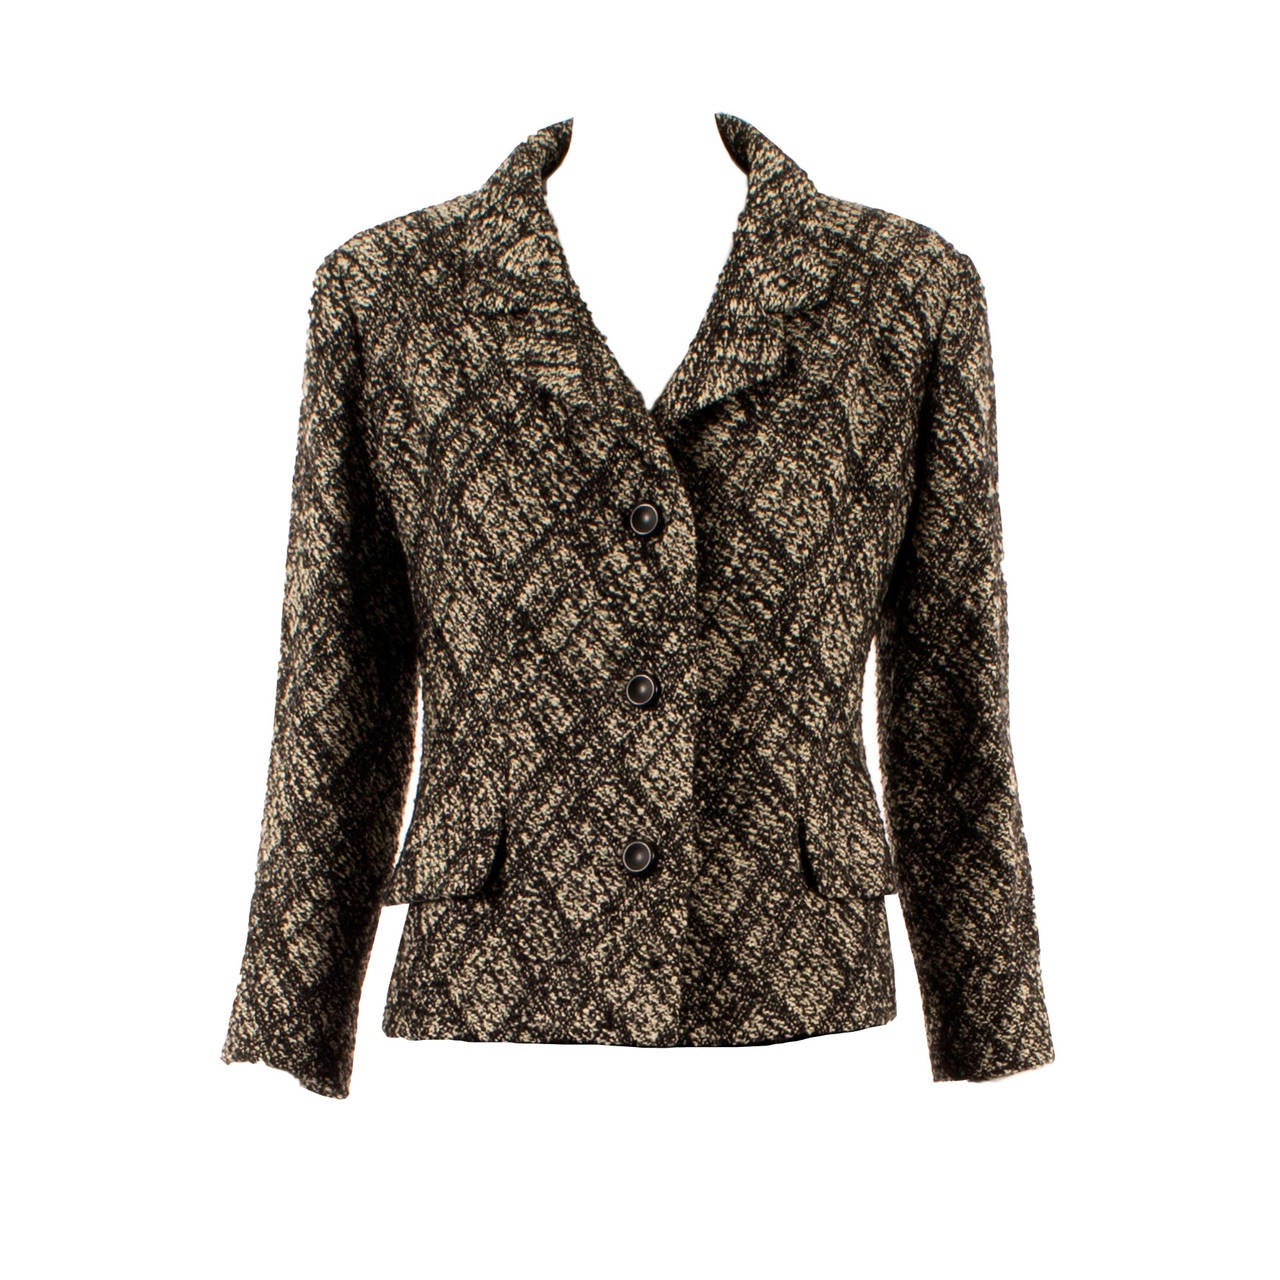 Yves Saint Laurent haute couture wool jacket, circa 1964 For Sale